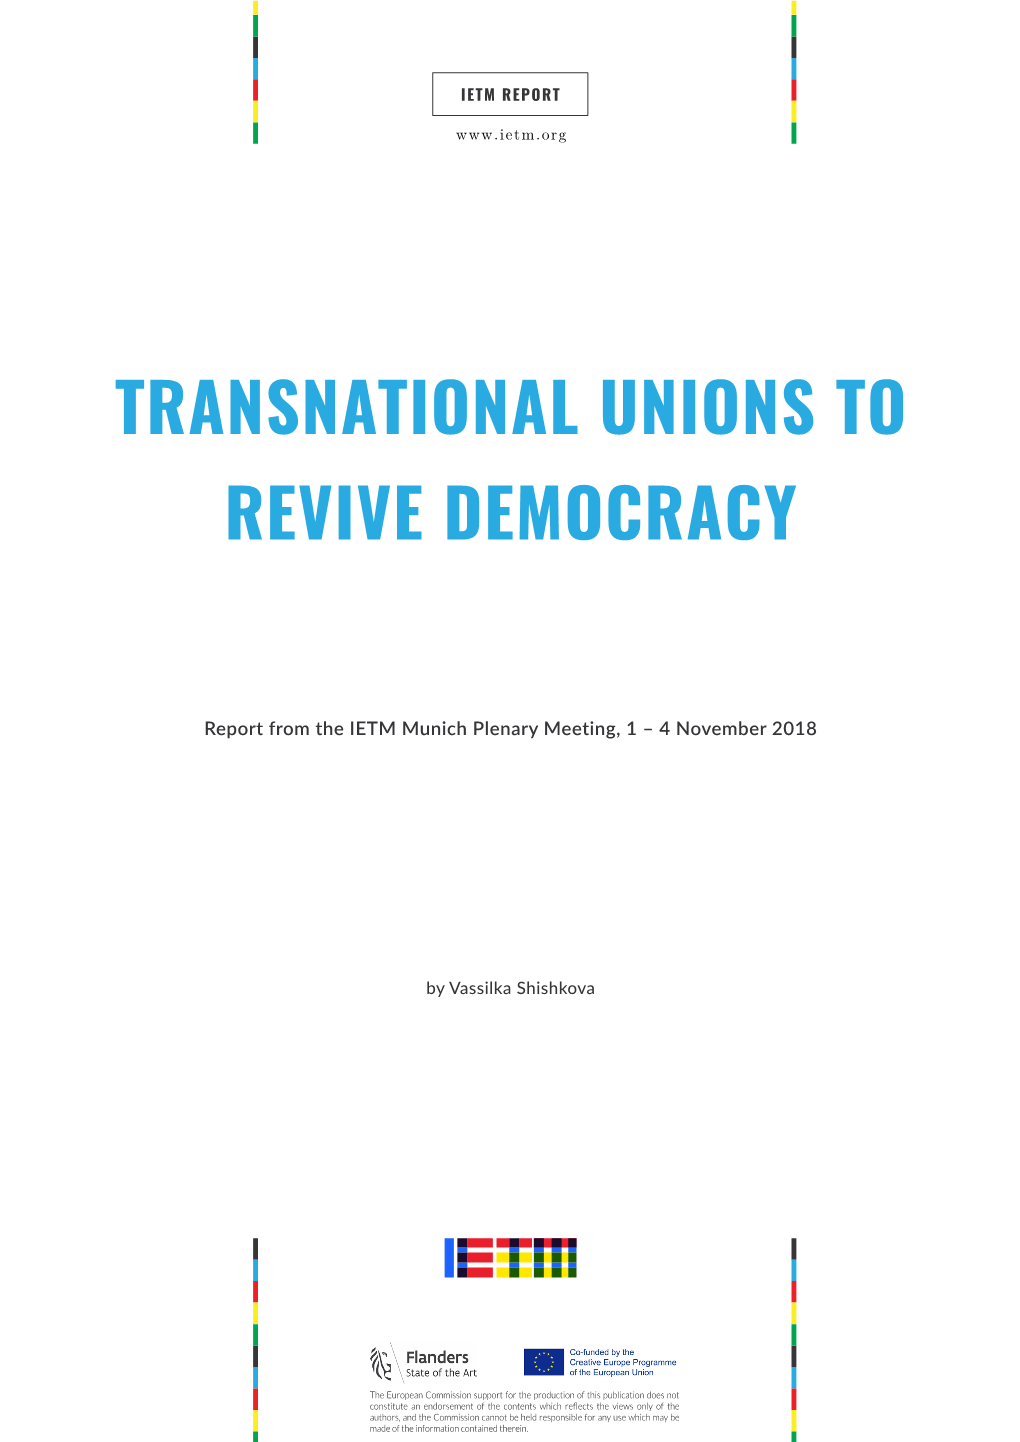 Transnational Unions to Revive Democracy